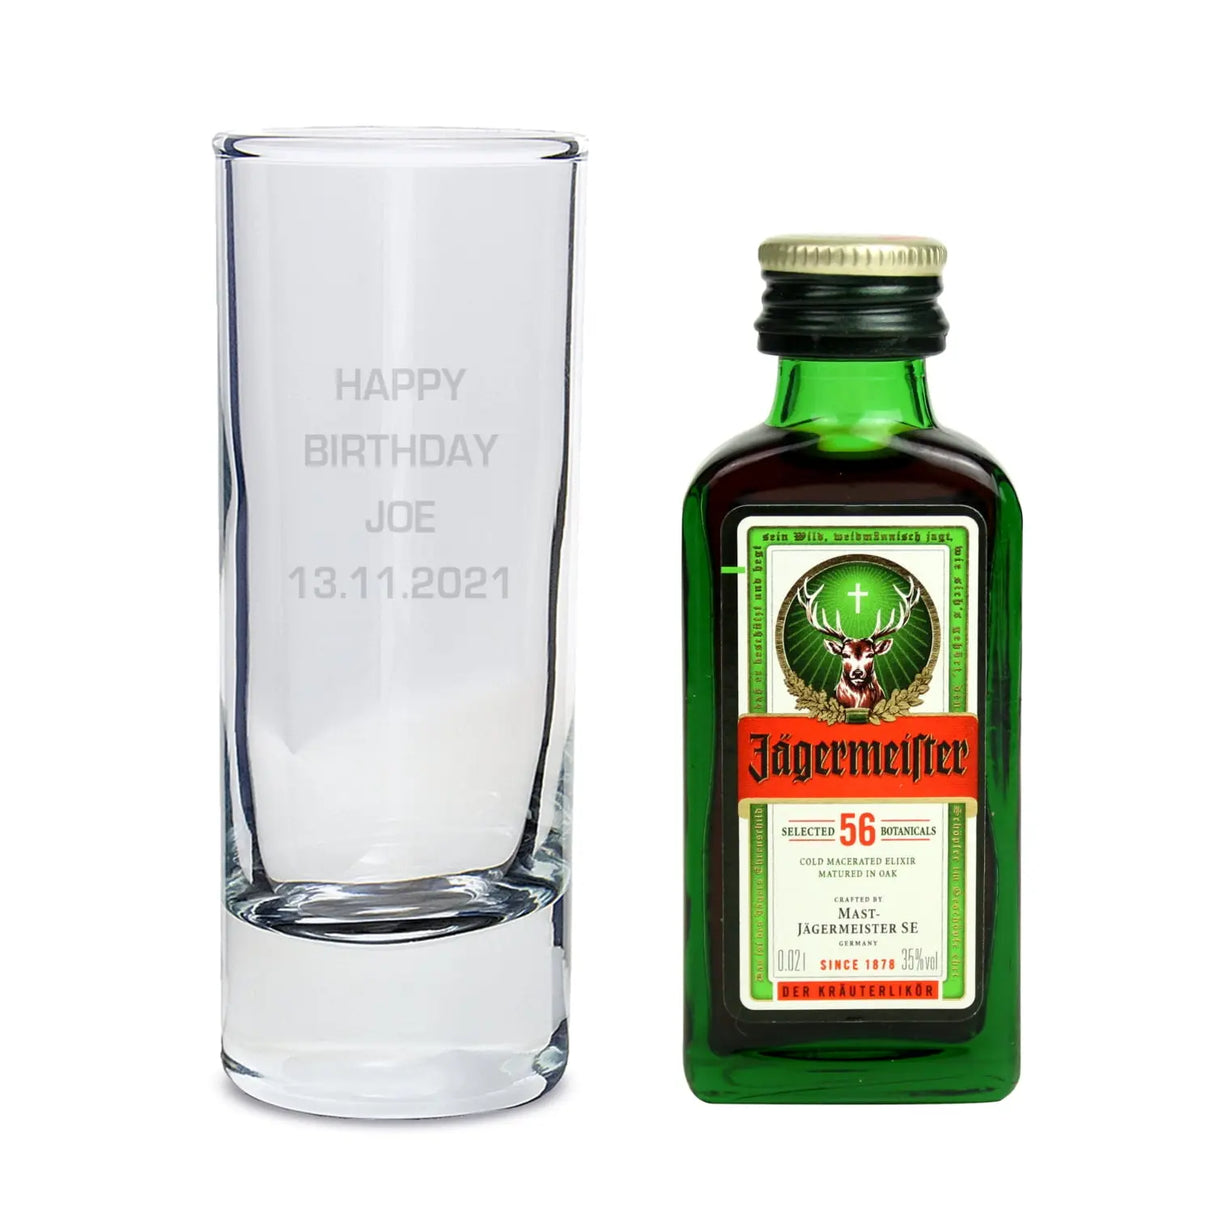 Personalised Shot Glass and Jagermeister Gift Set - Gift Moments